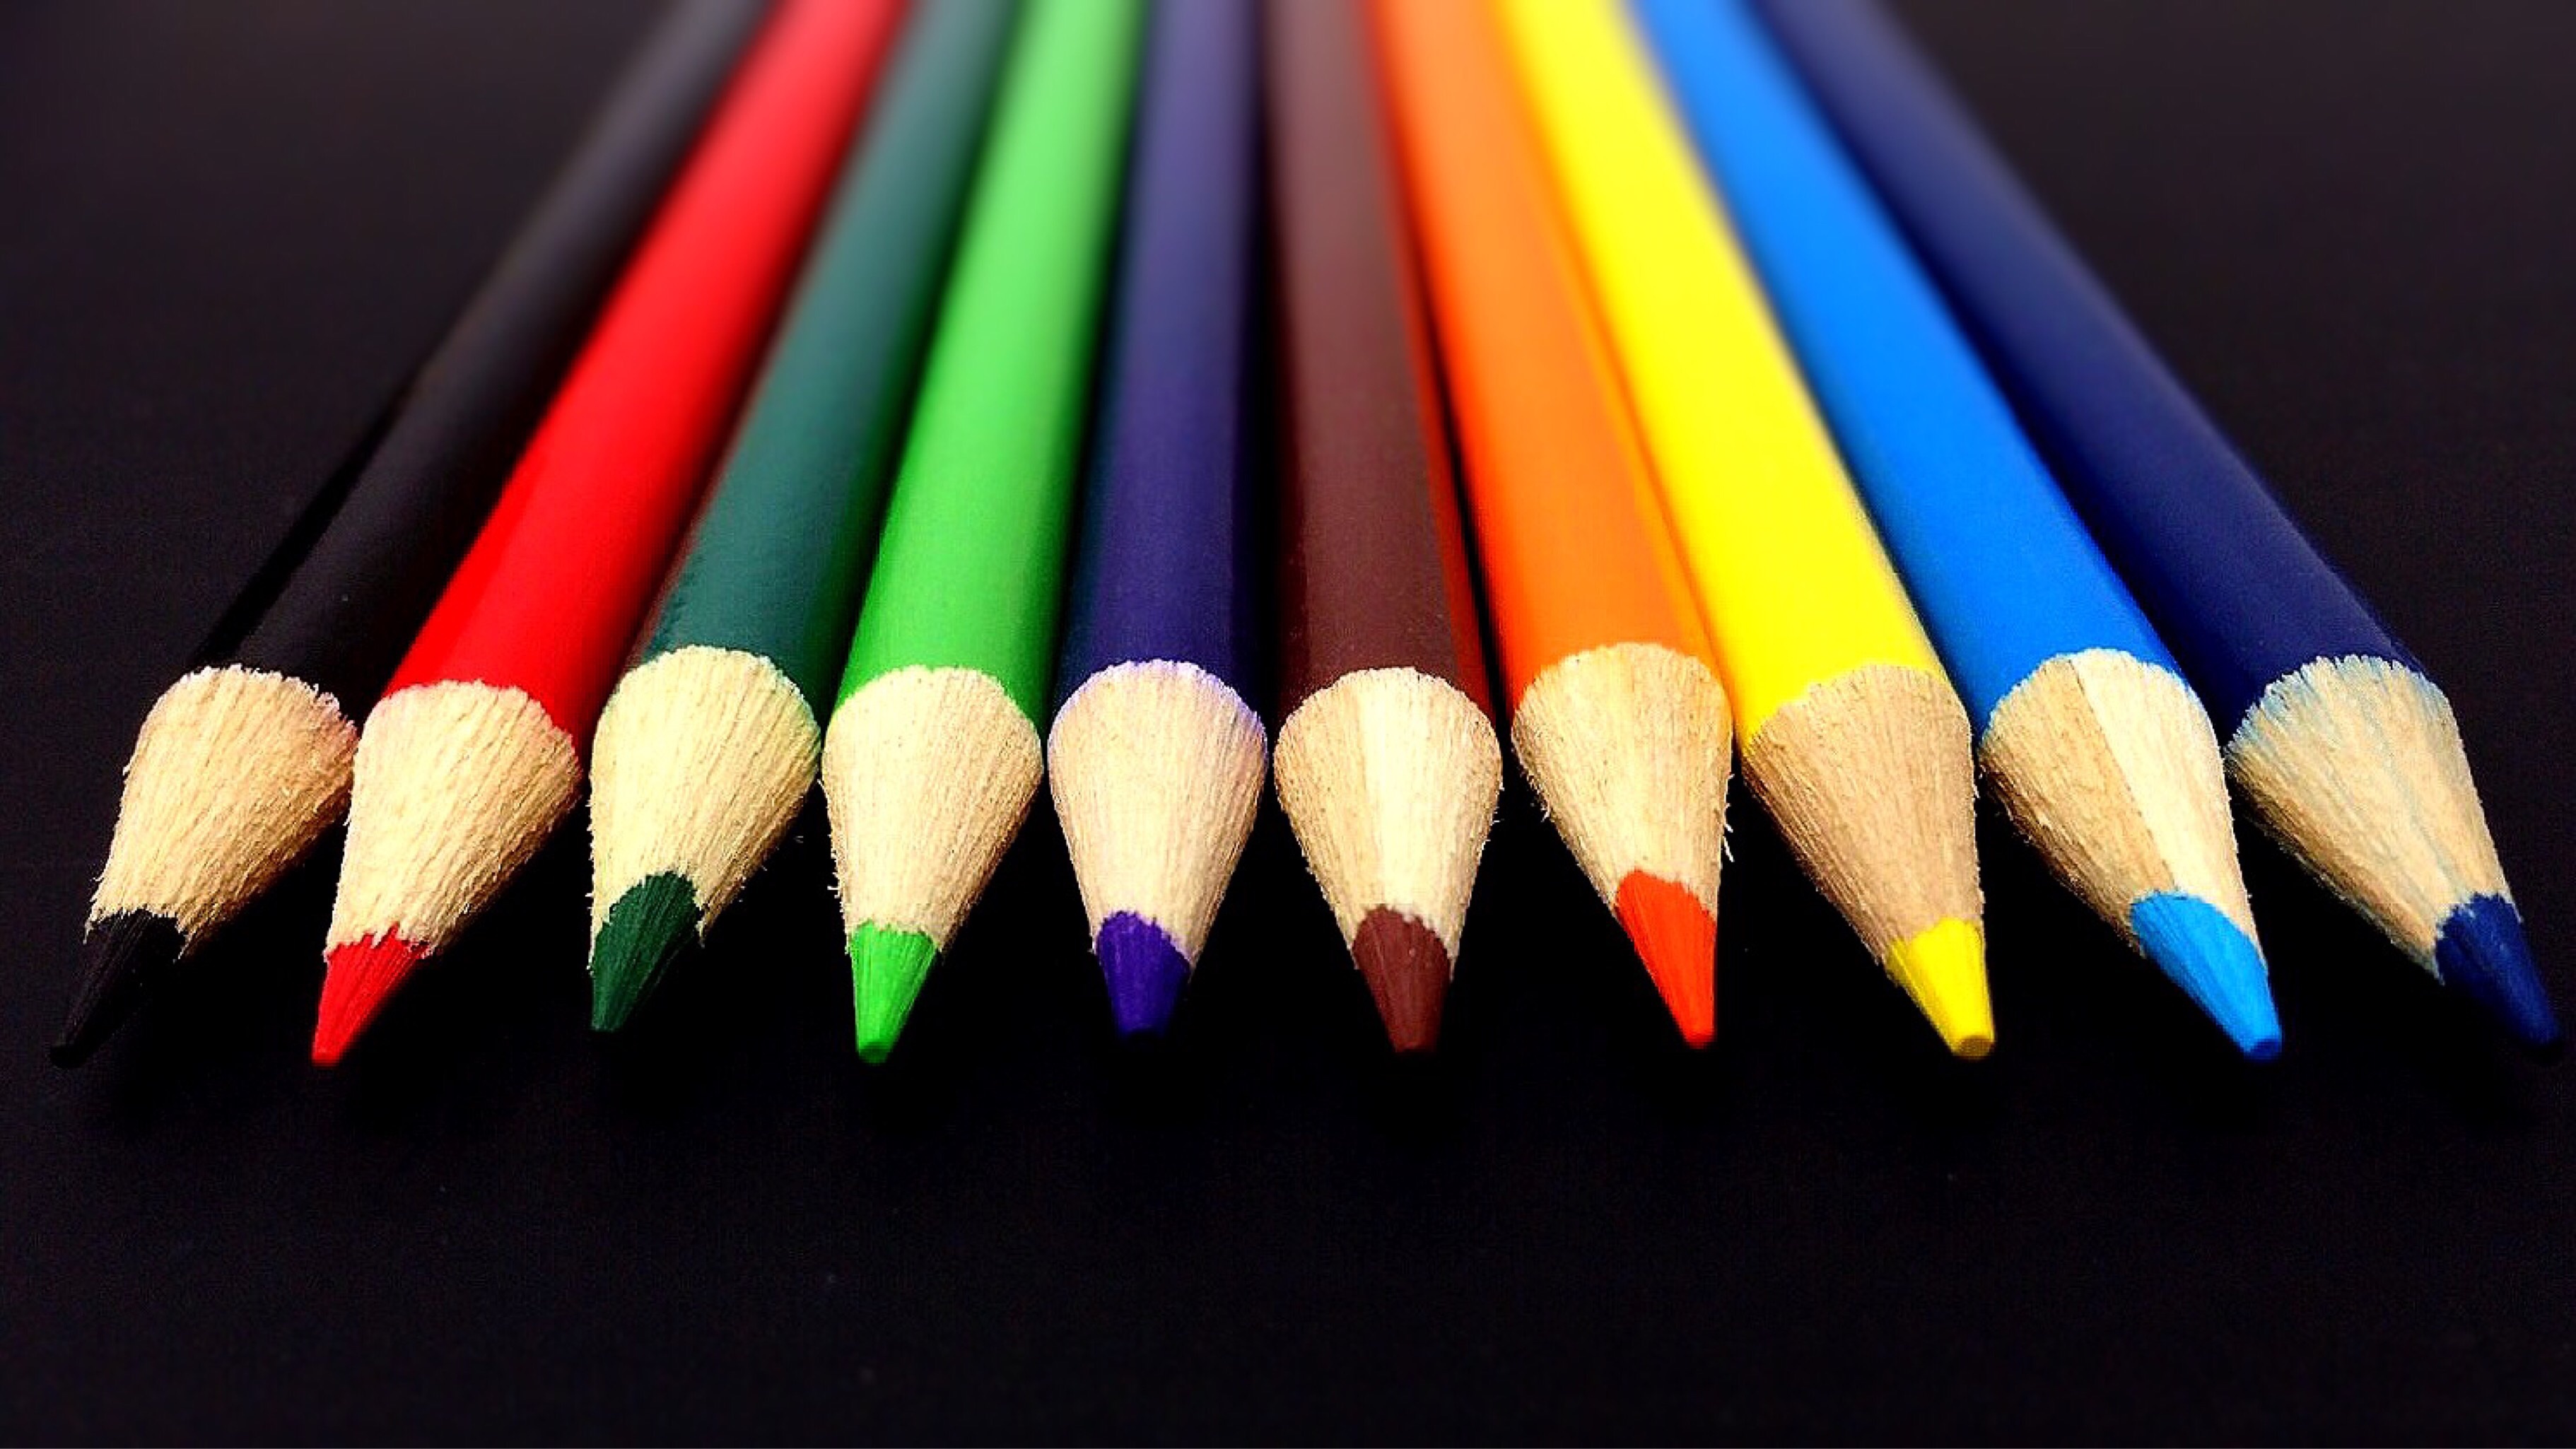 Wallpapers pencil color rainbow on the desktop